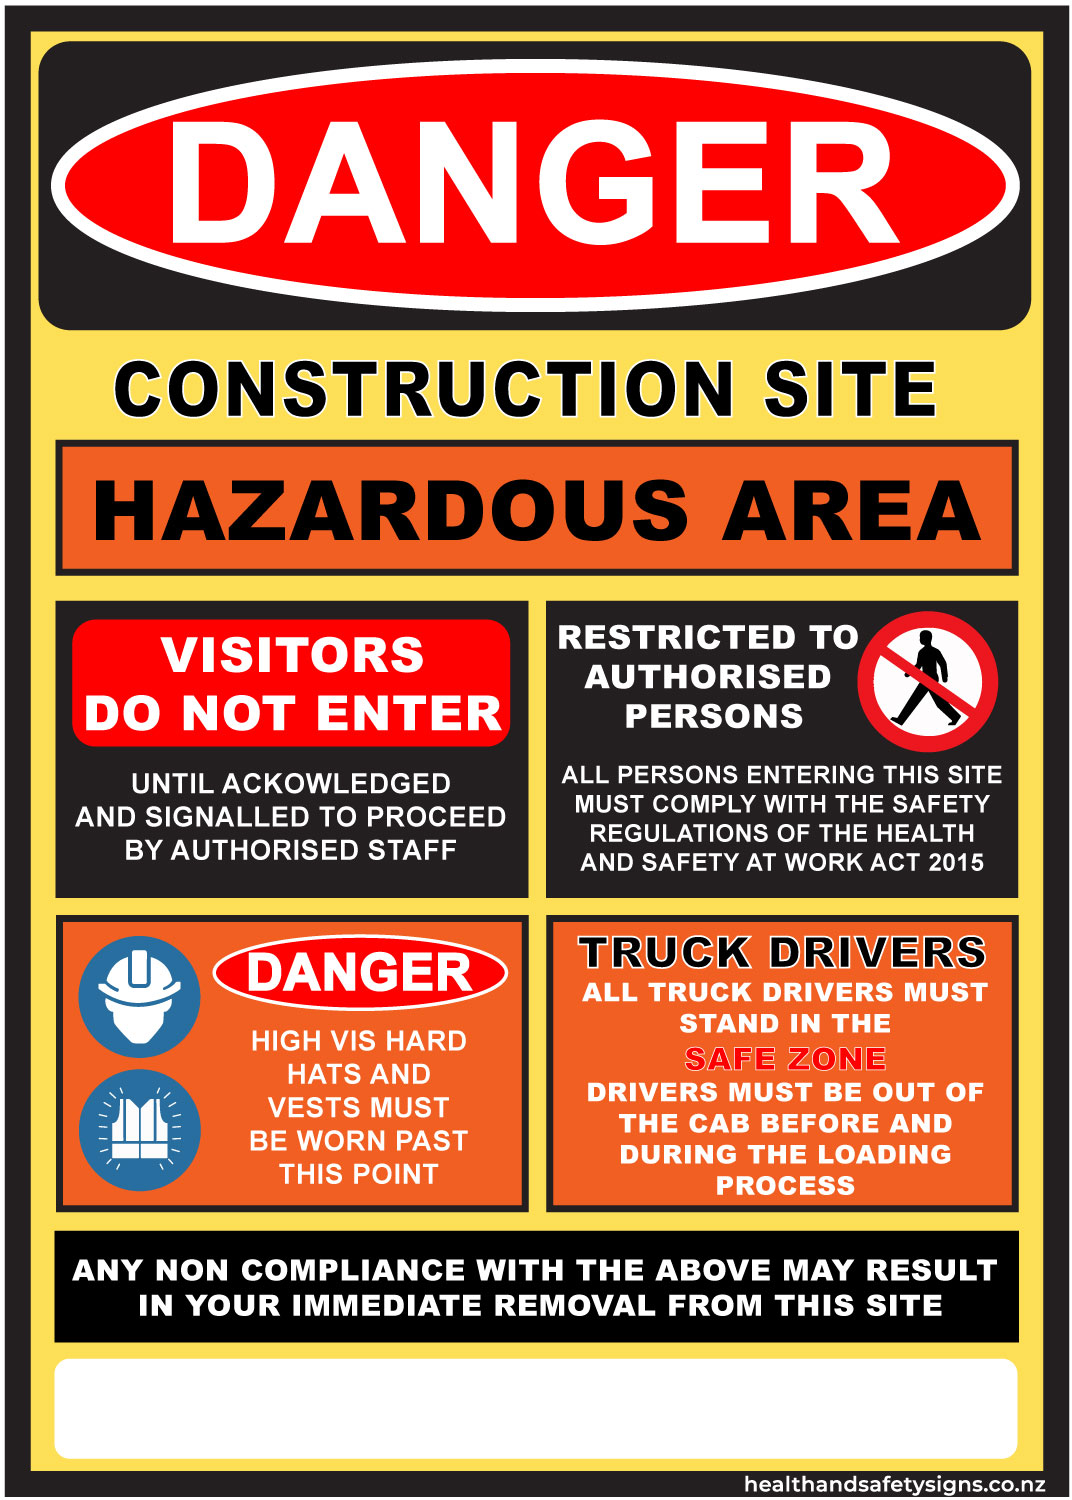 Construction Site Hazardous Area Danger Sign - Health and Safety Signs